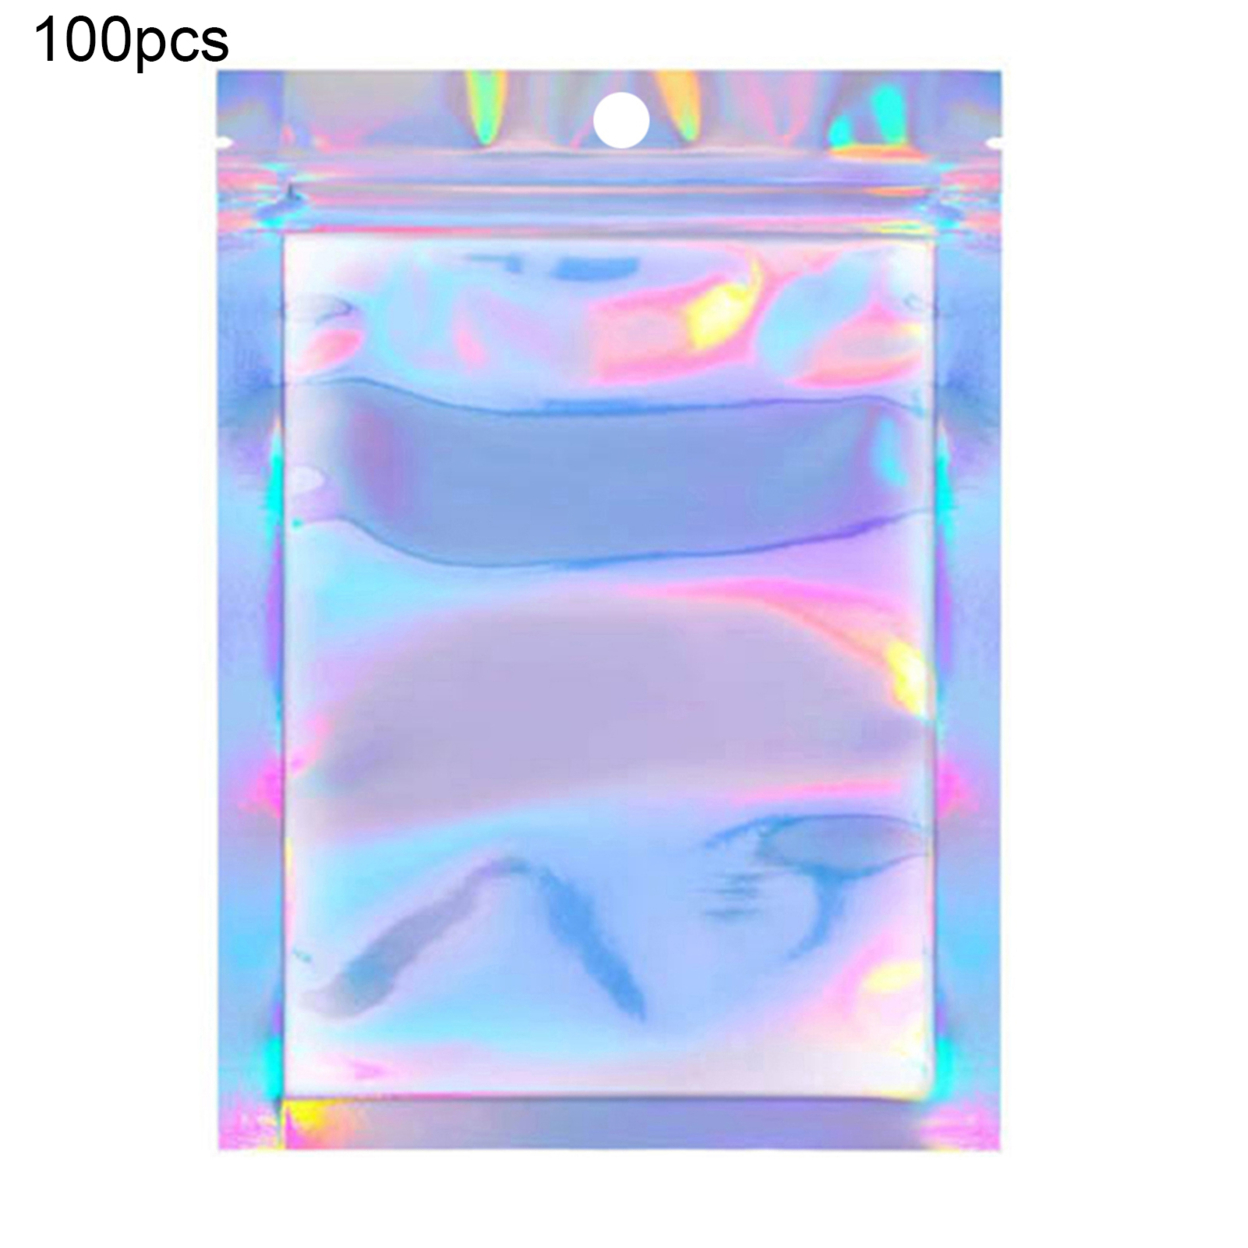 100Pcs Set Clear Holographic Laser Seal Bags Eyelashes Package Storage Pouch - 14cm x 20cm